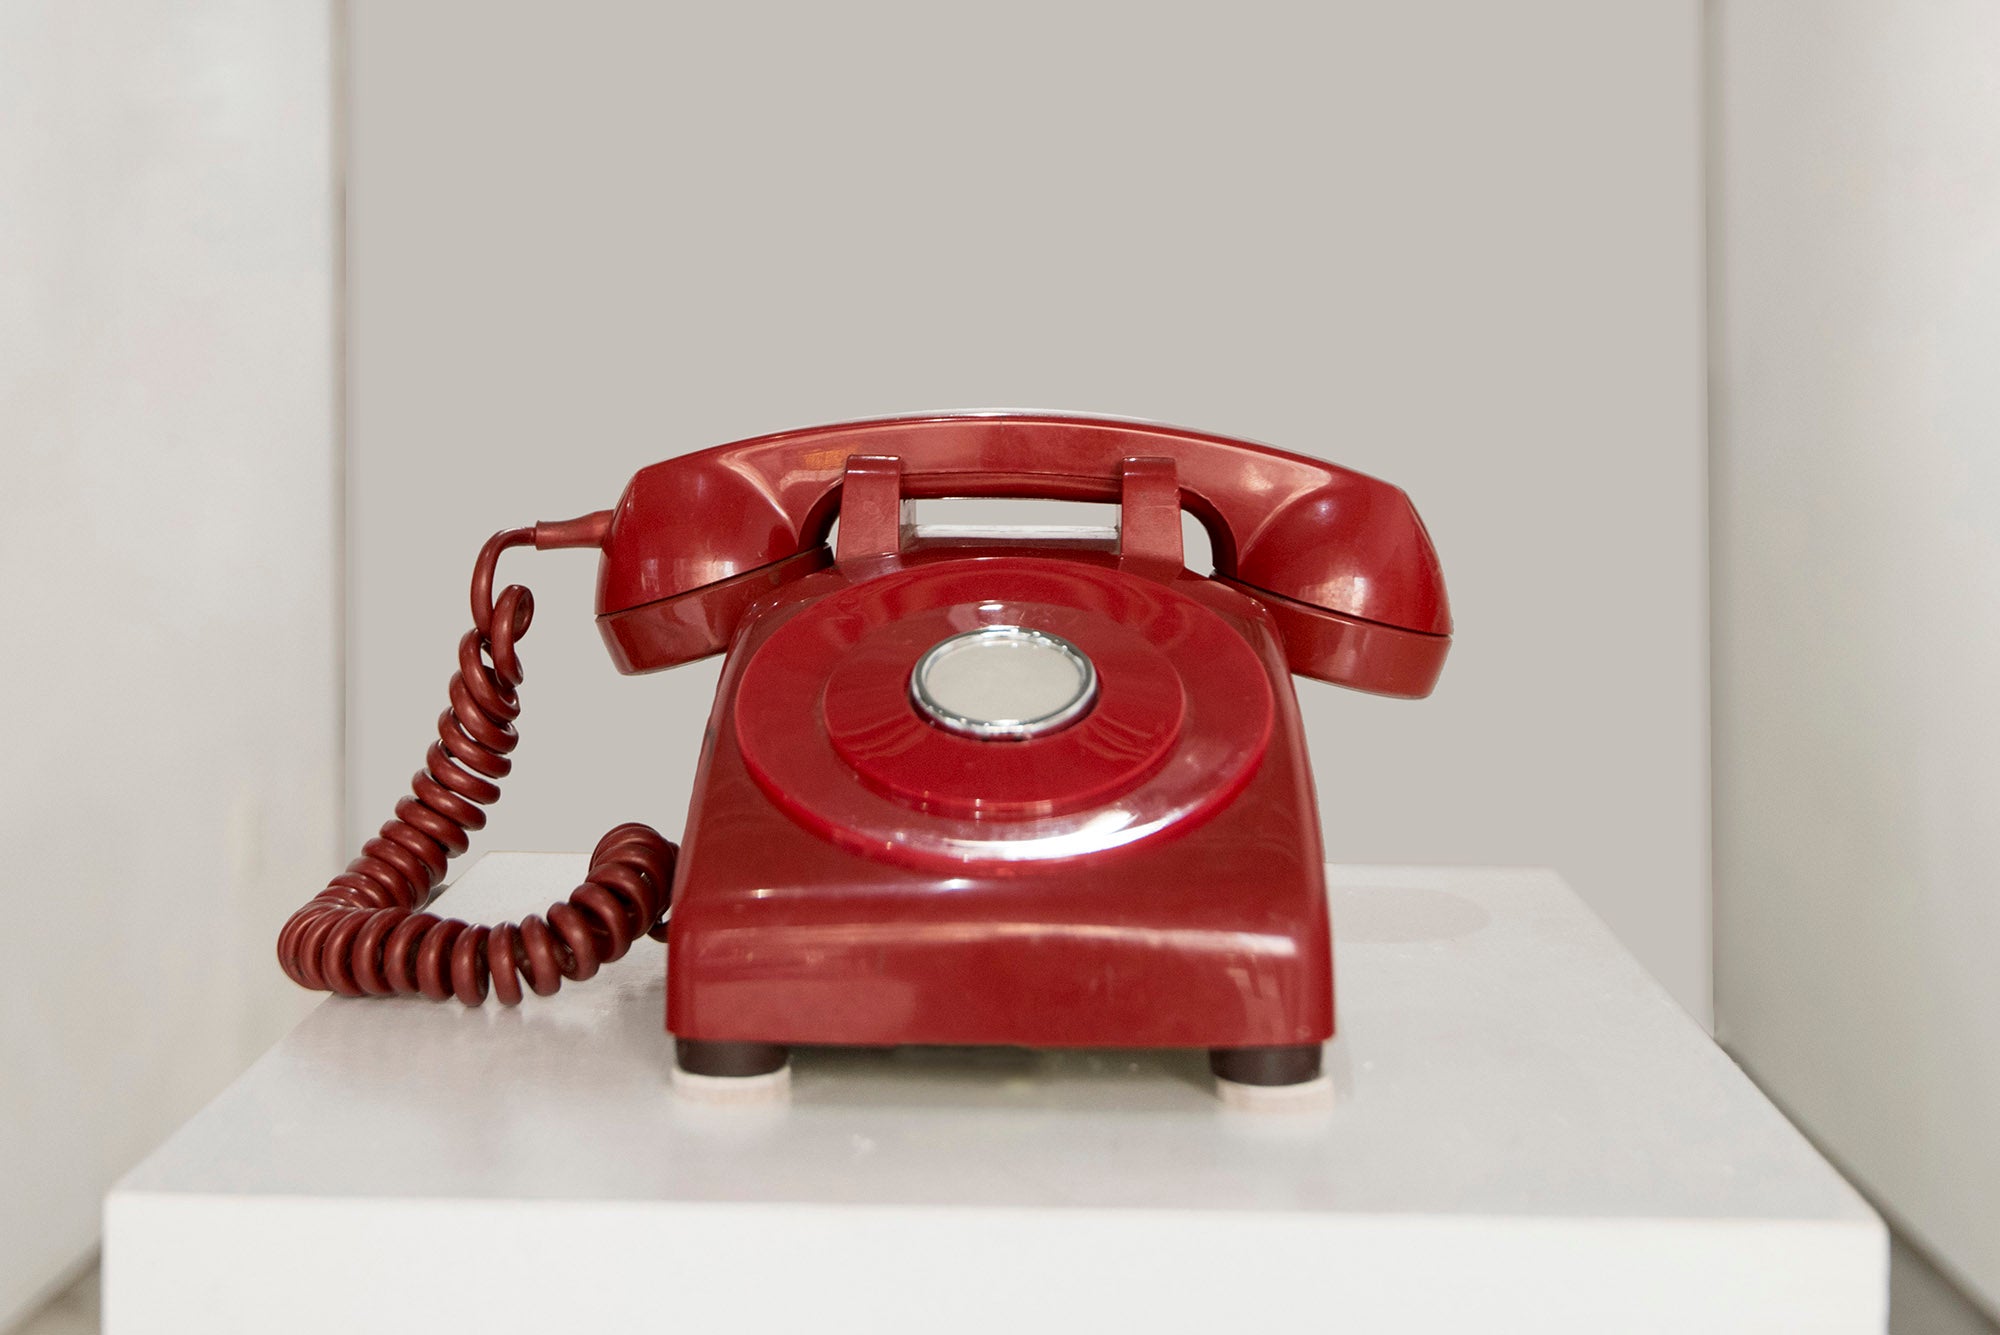 Phil Buehler, "Fire and Fury #1 / Red Phone"